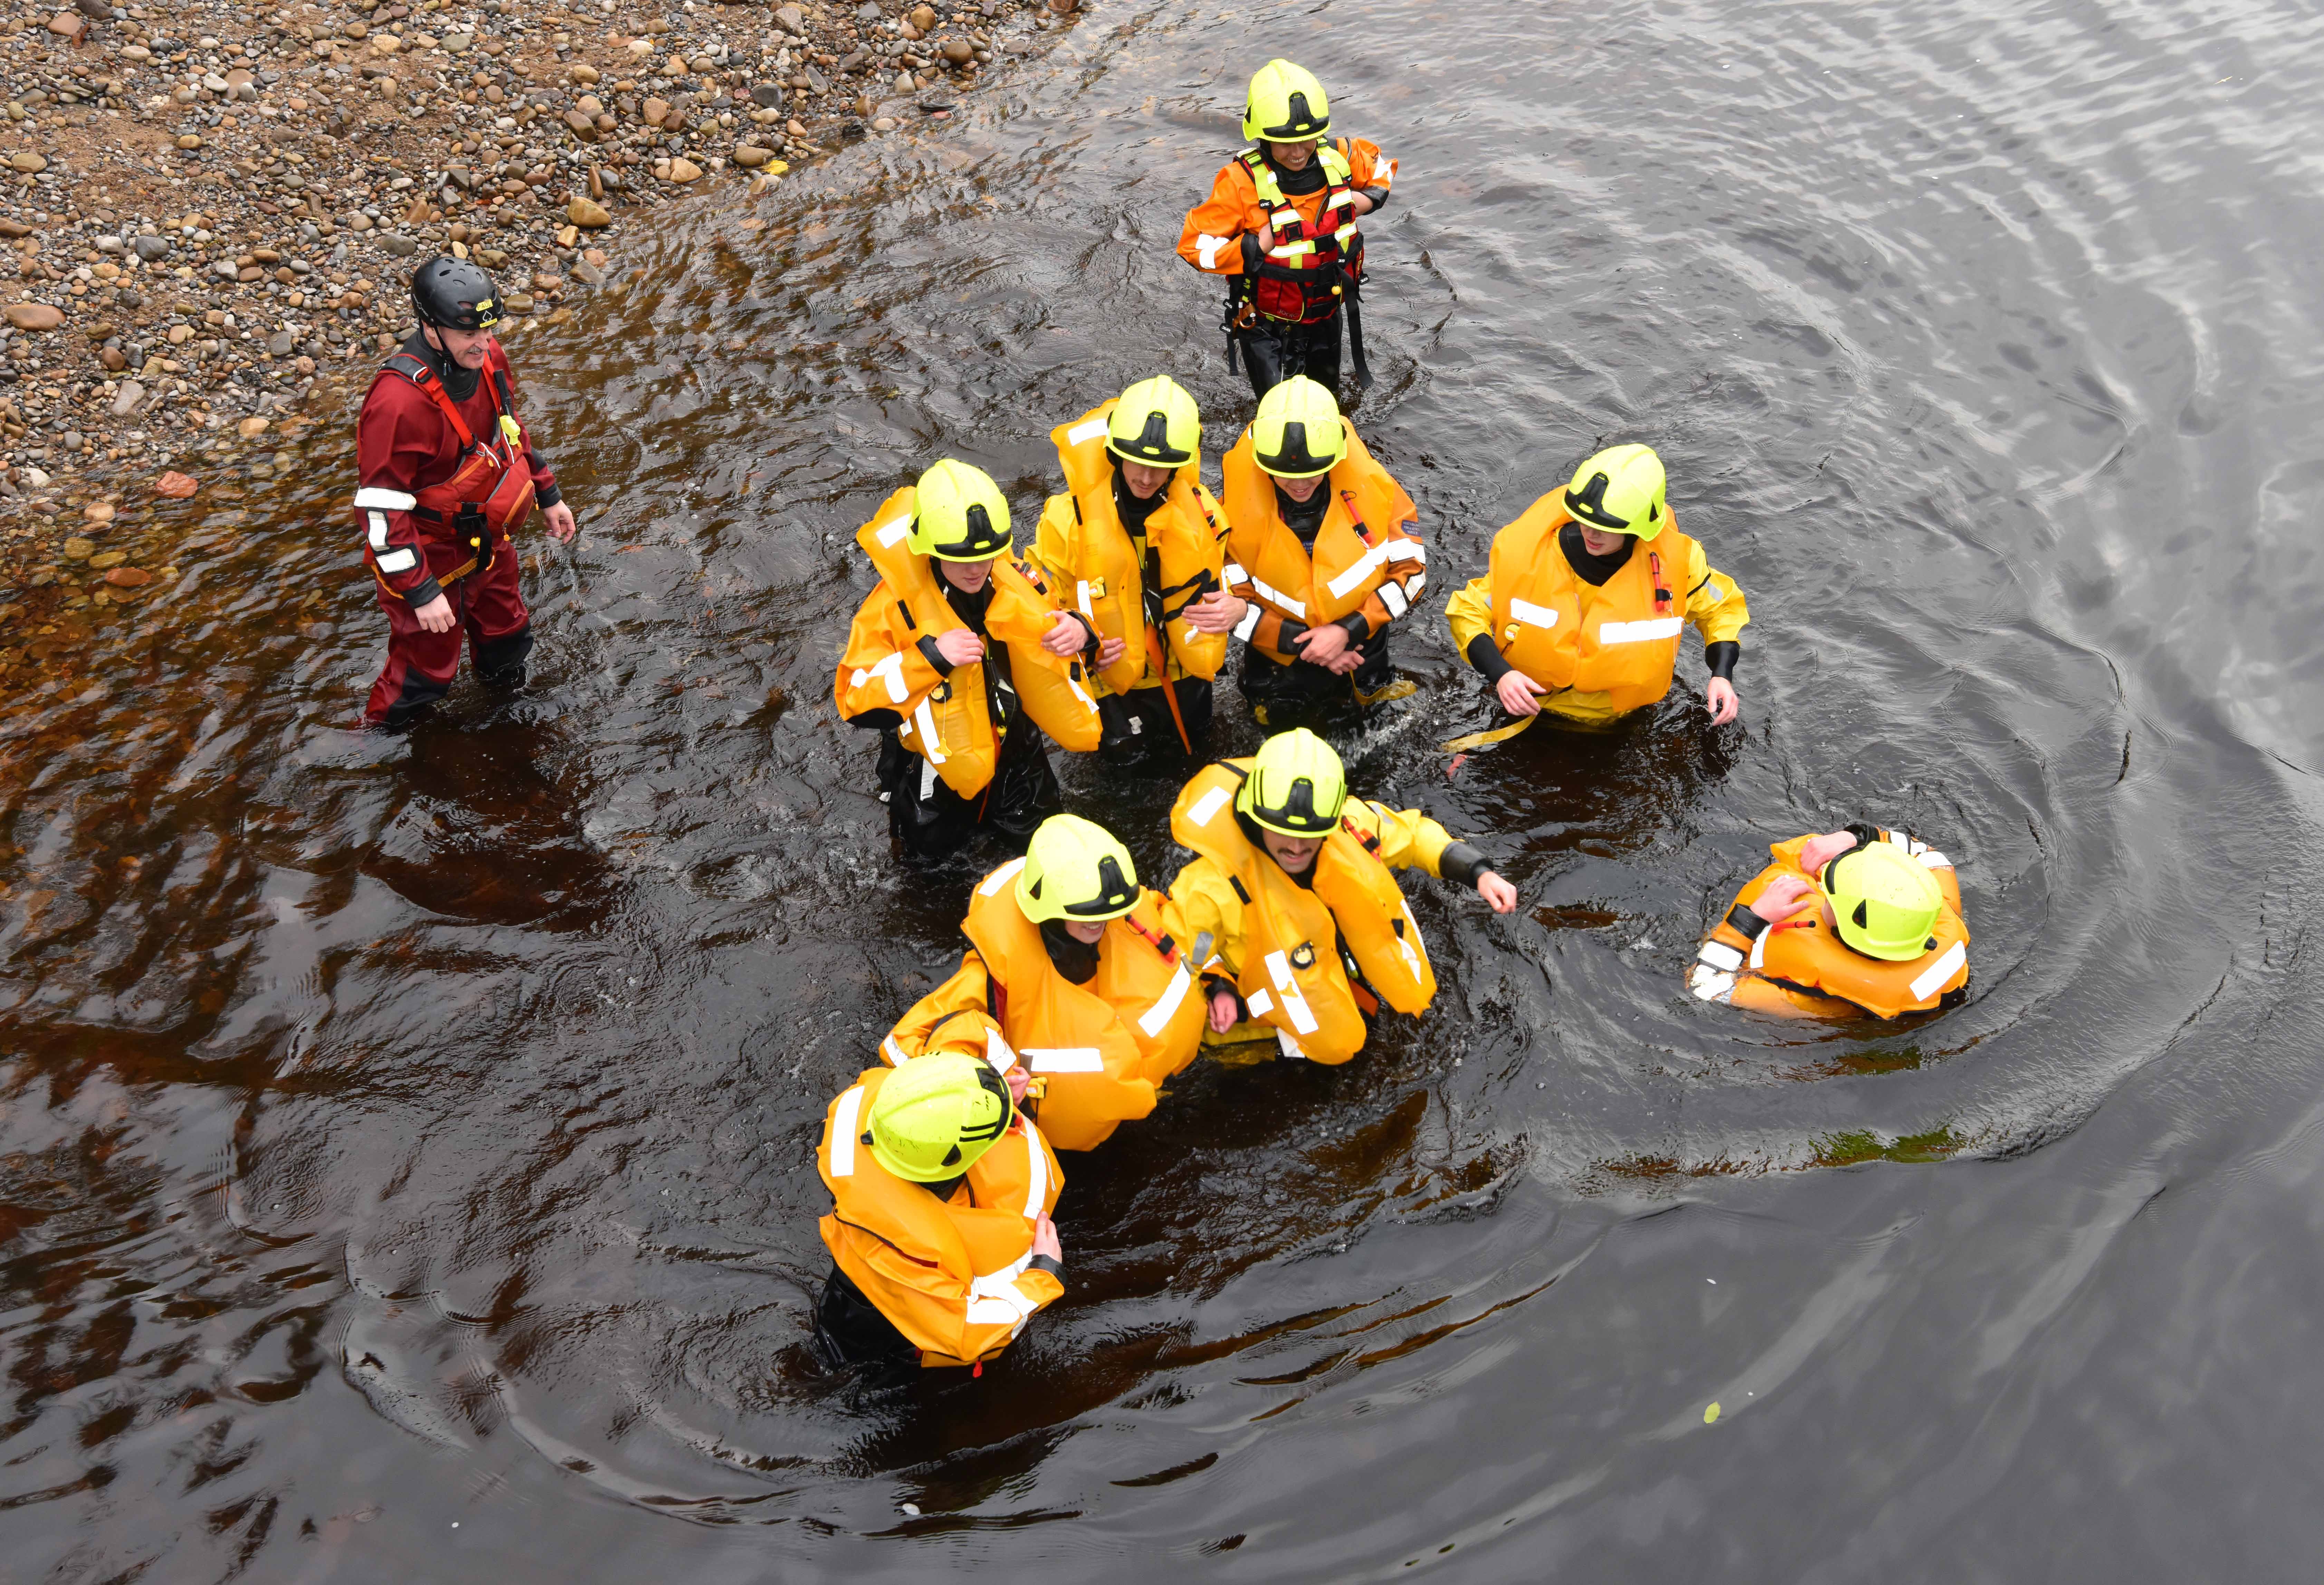 Water rescue training at Ilkley 2021